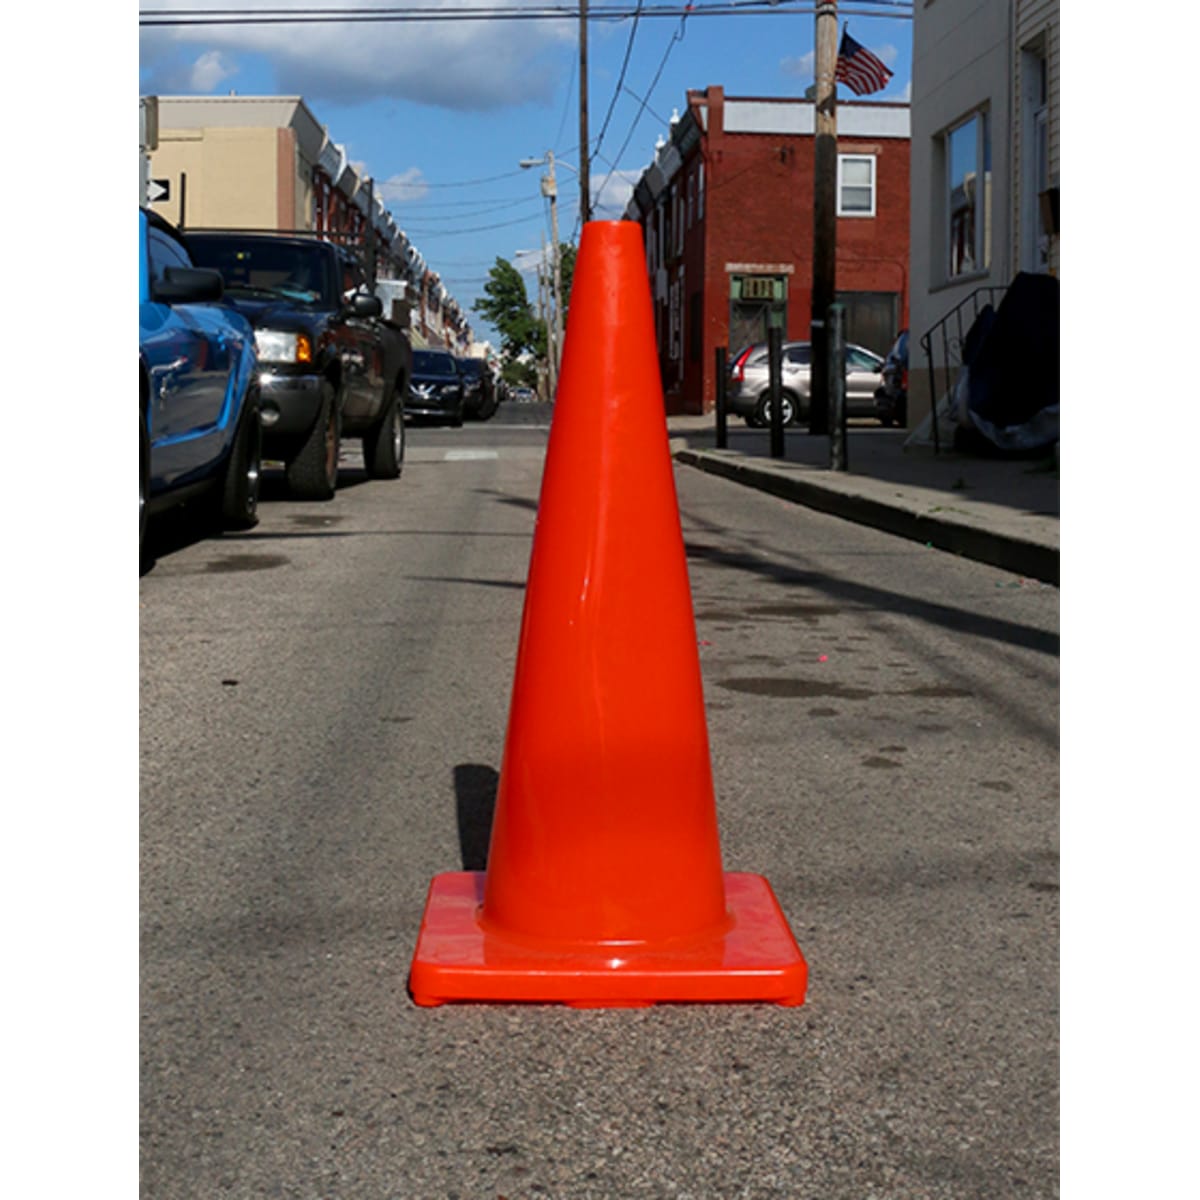 Street Cones 2 Pack Church Parking Cones Construction Cones Parking Cones Safety Cones 28 Yellow Cones with Church Parking Signs